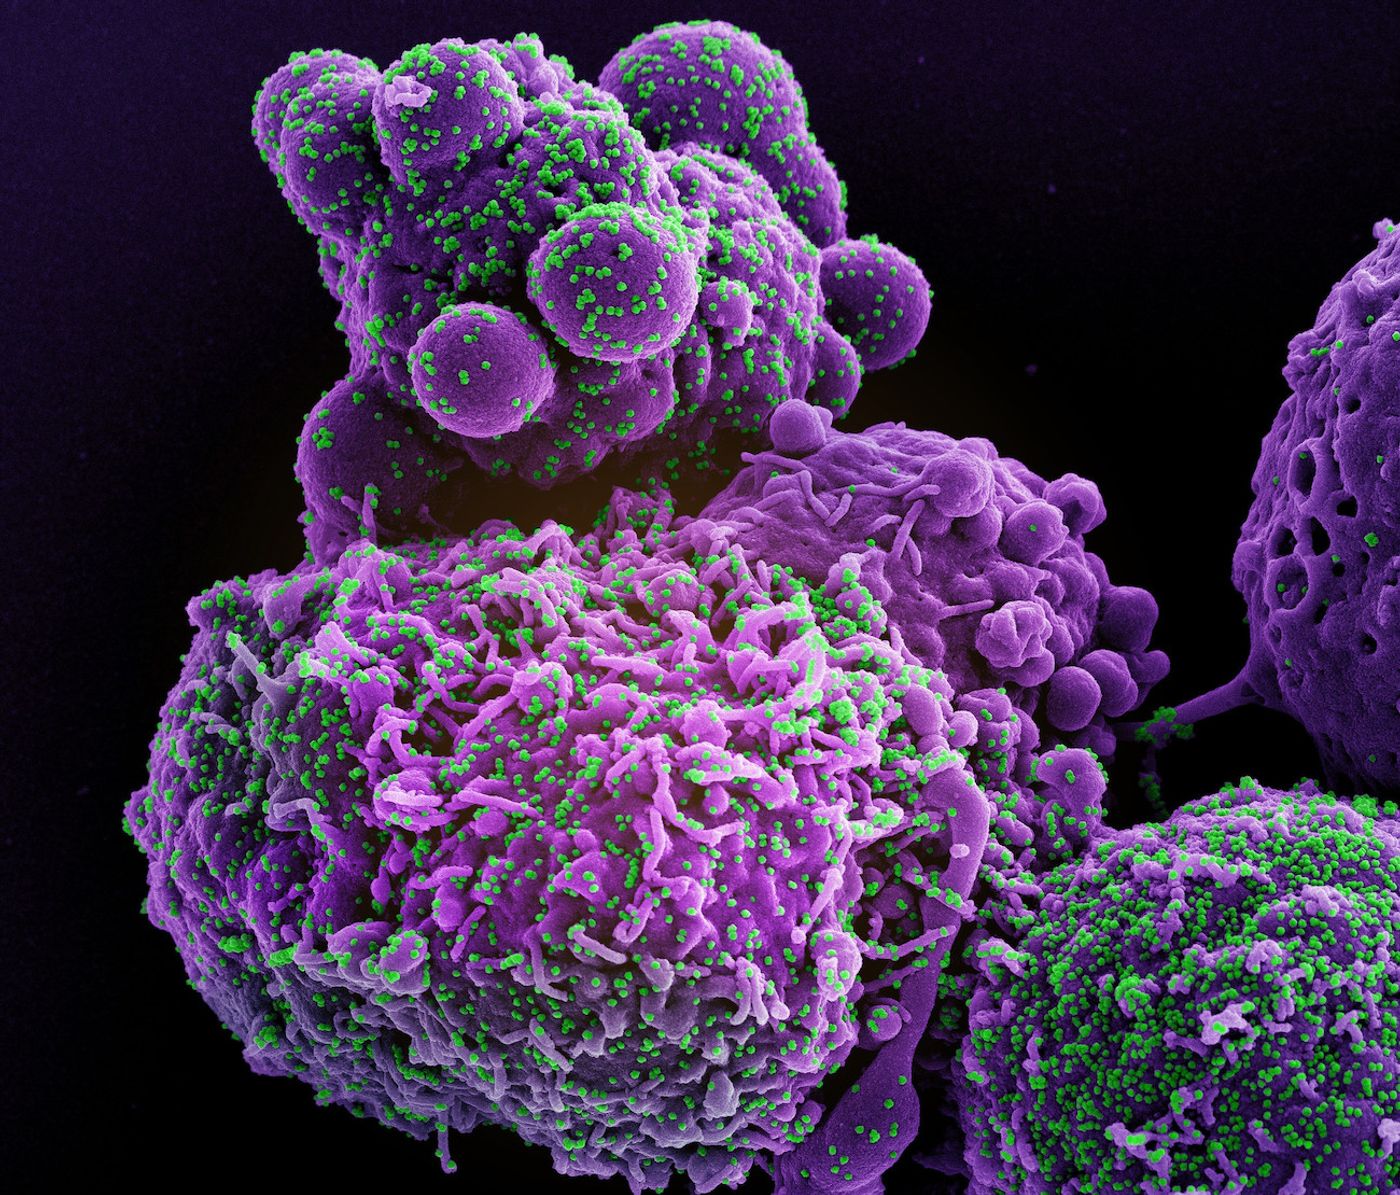 Colorized scanning electron micrograph of a cell (purple) infected with the Omicron strain of SARS-CoV-2 virus particles (green), isolated from a patient sample. Image captured at the NIAID Integrated Research Facility (IRF) in Fort Detrick, Maryland. Credit: NIAID